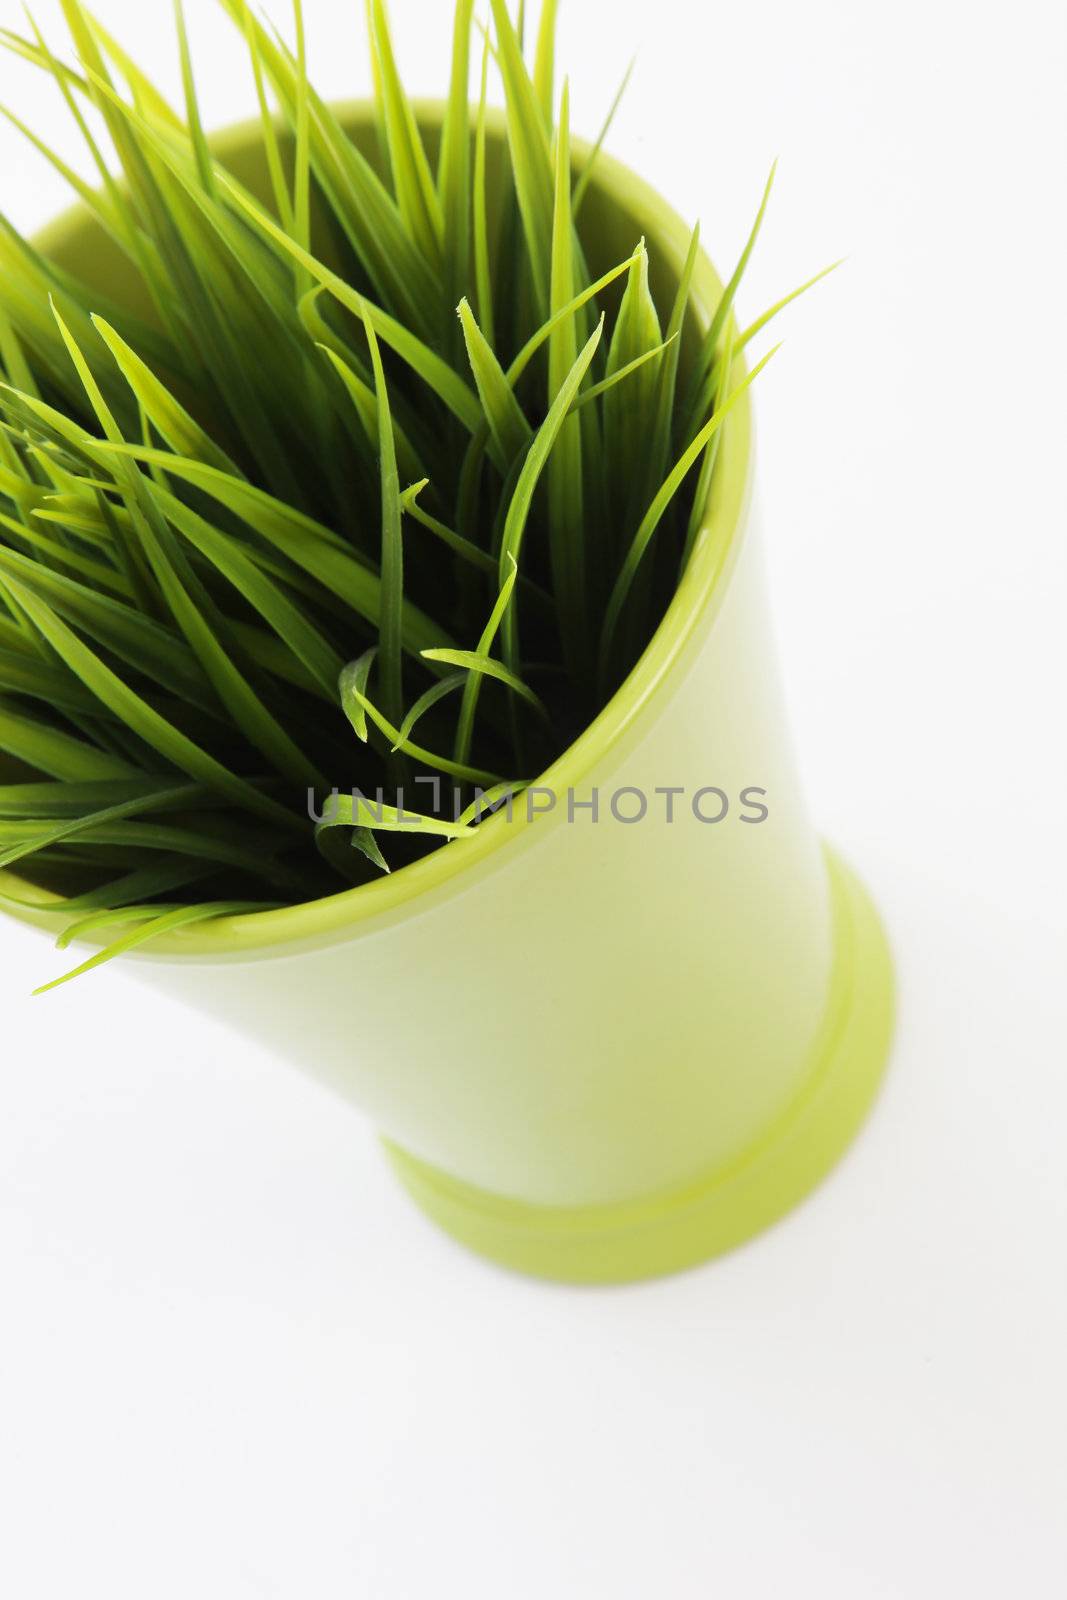 Fresh green spring grass growing in a decorative yellow-green flowerpot, high angle view isolated on white